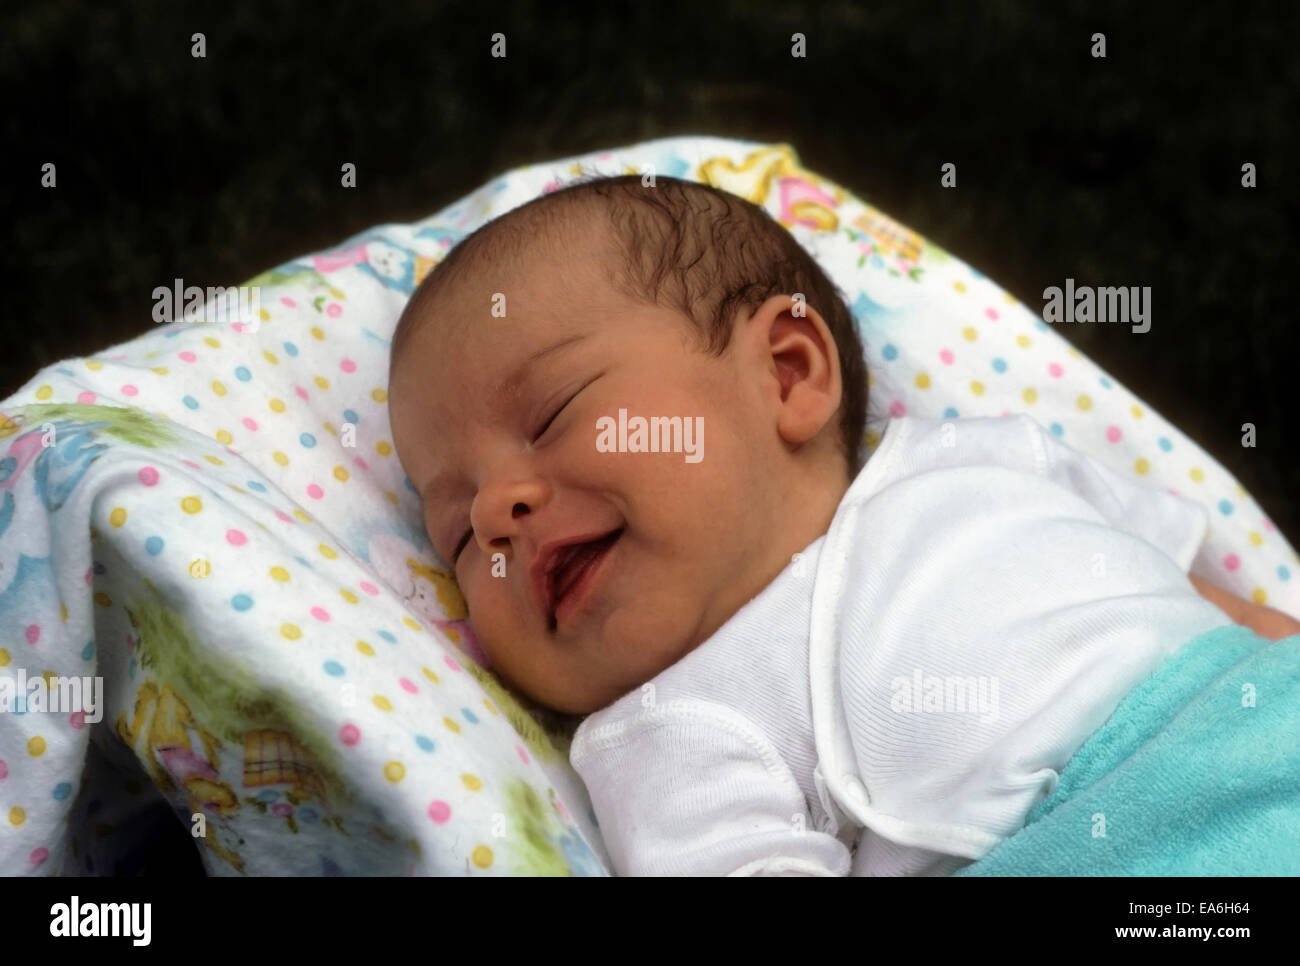 Infant boy sleeping in his carrier has a beautiful smile on his face. He seems to be laughing. Stock Photo